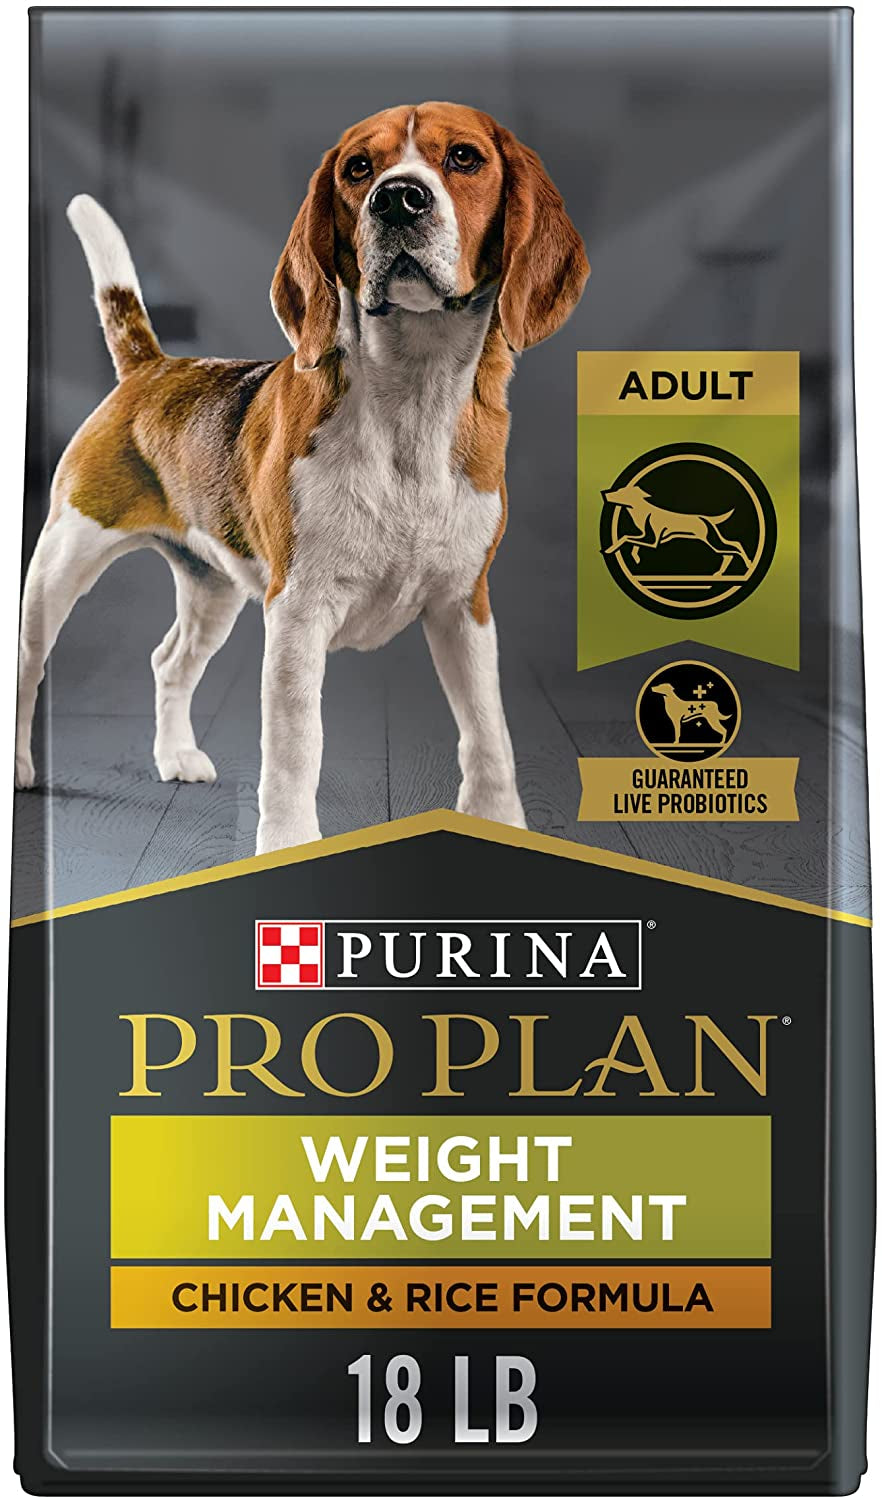 Purina Pro Plan Weight Management Dog Food with Probiotics for Dogs, Chicken & Rice Formula - 18 Lb. Bag